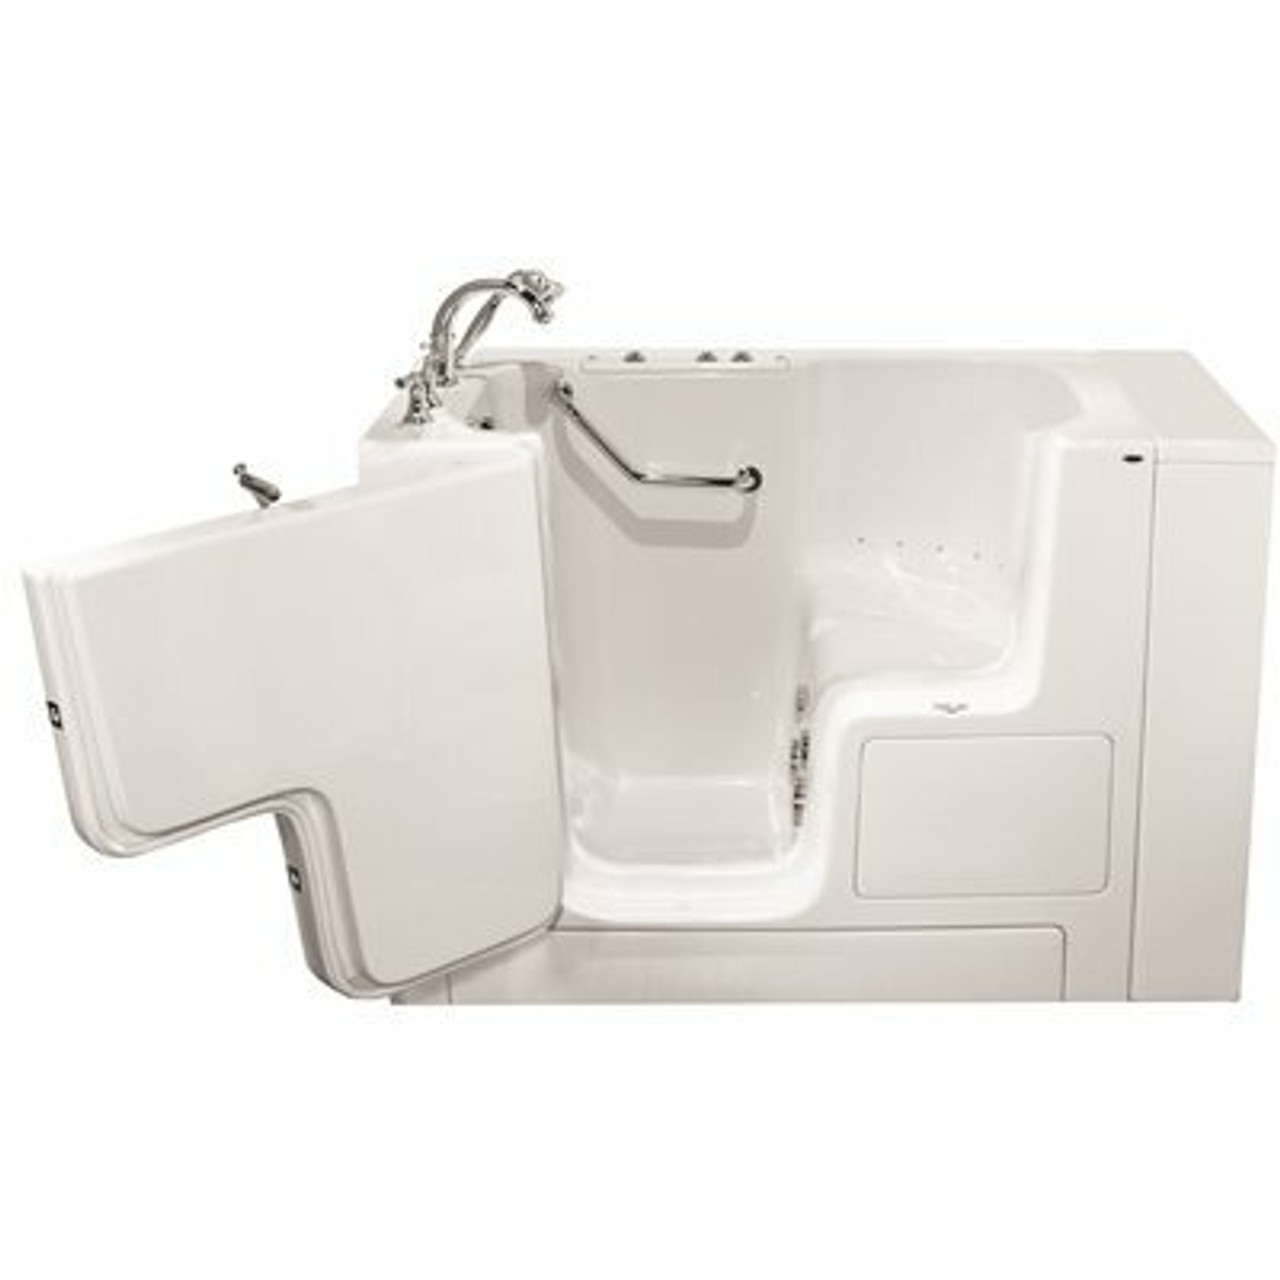 American Standard Gelcoat Walk-In Bath, Combination, Left-Hand With Quick Drain And Faucet, White, 32 In. X 60 In. - 3559103